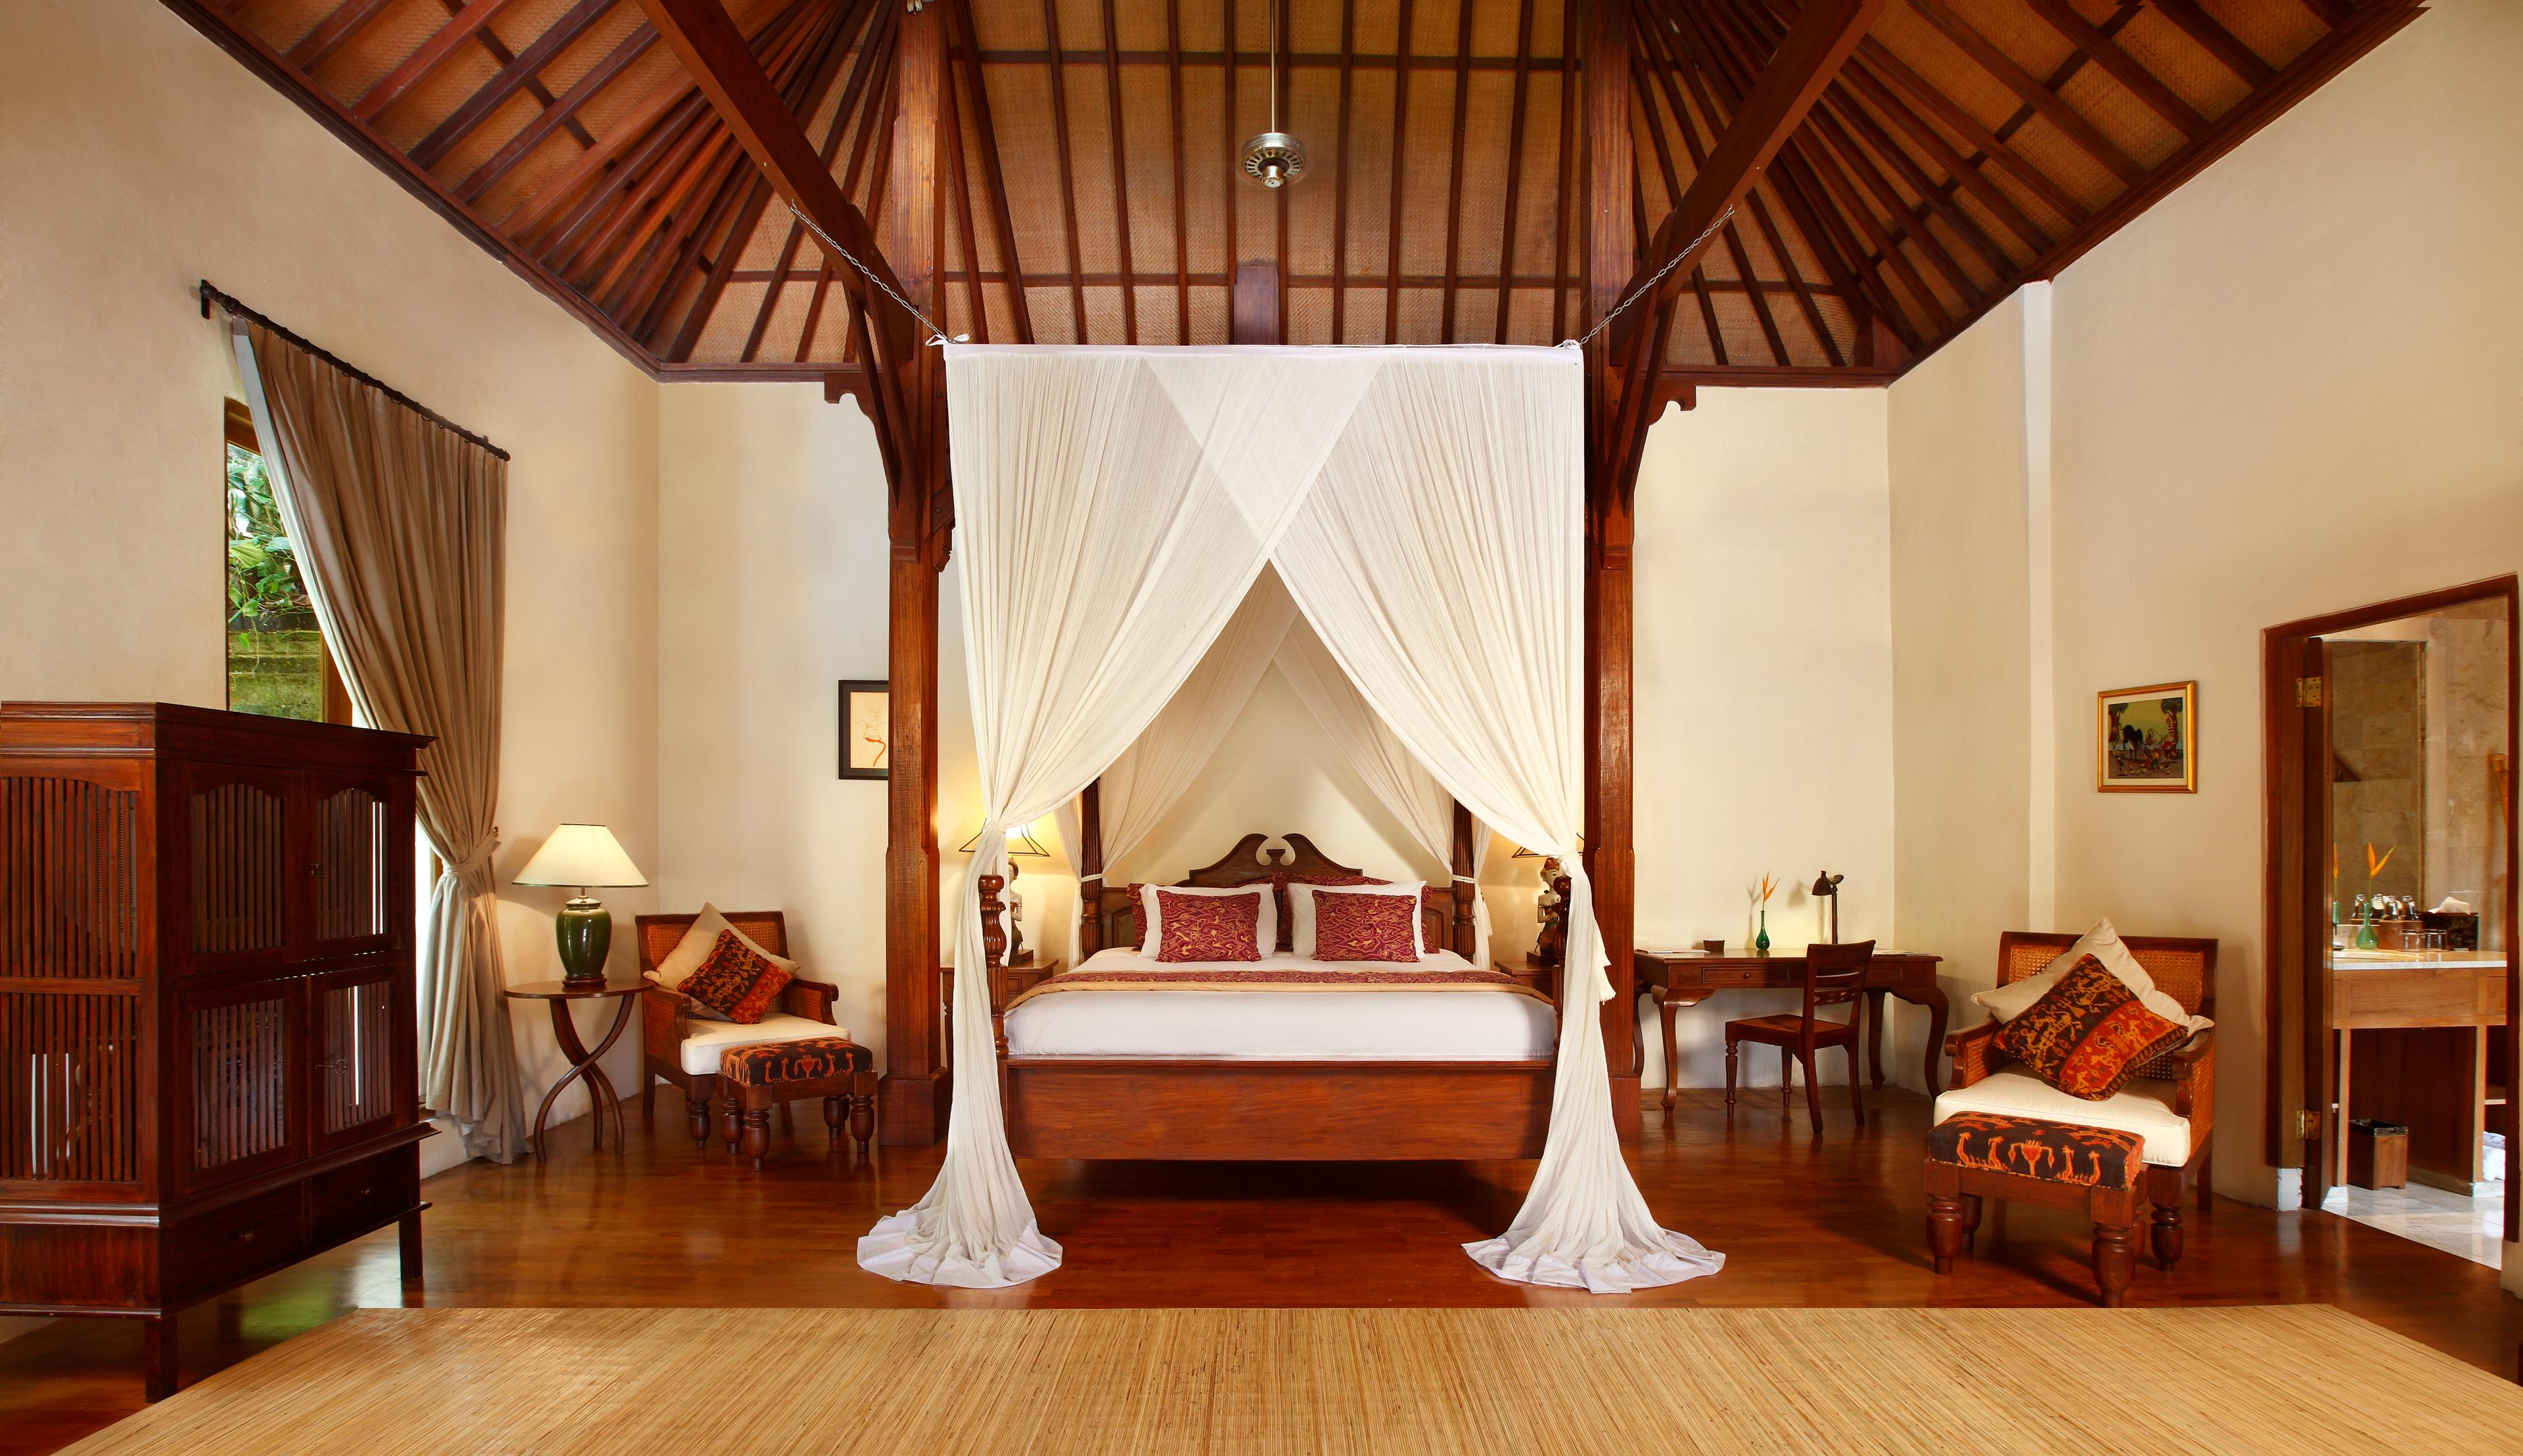 Luminous suites filled with modern Balinese and colonial style dcor